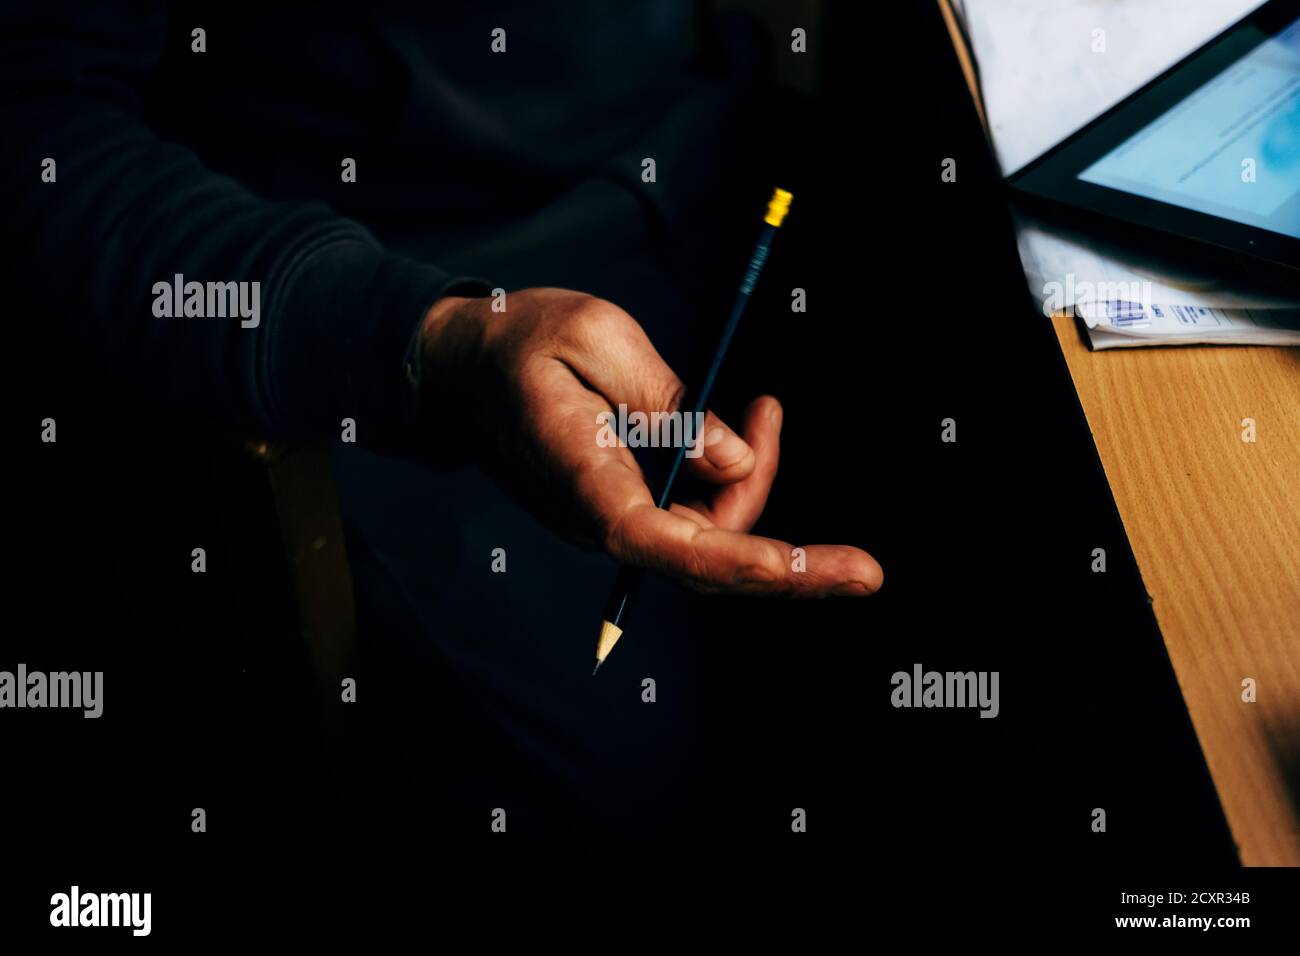 detail of the hand of a man holding and wrapping a pencil around the fingers while he is busy at the office desk Stock Photo